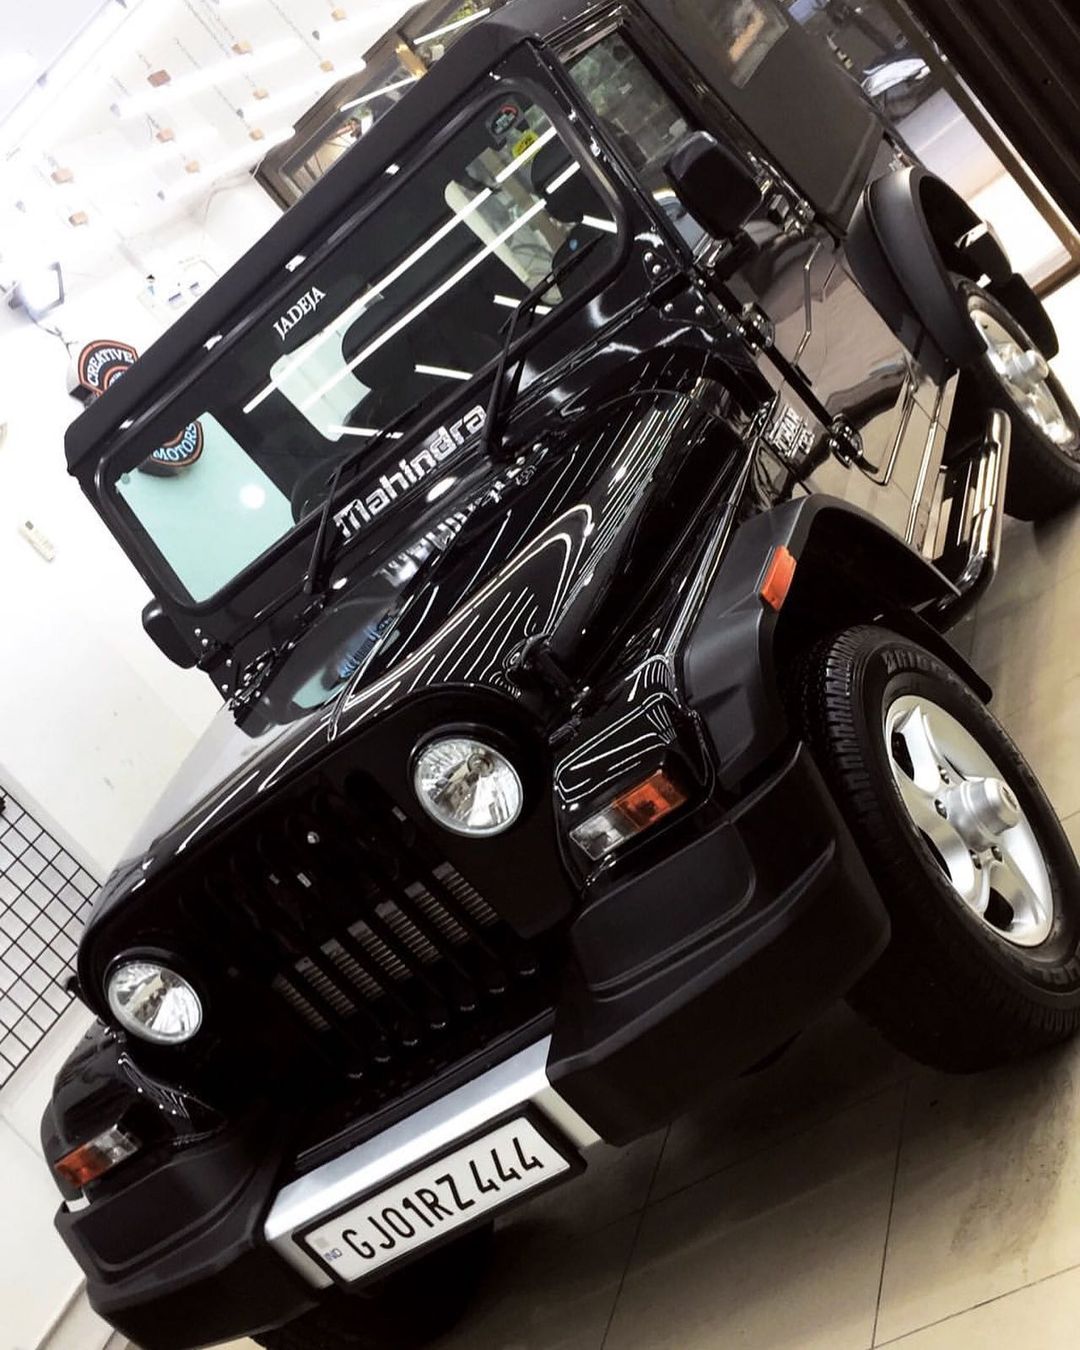 Ceramic Coating on Mahindra Thar 
Benefits of Ceramic Coating👇 🔺9H Hardness coat 🔺Remove Swirl marks 🔺Weather Resistance 🔺Mirror finish 🔺Avoids UV rays 🔺Water & Dust Repellent 
Get the Best Ceramic Coating For your Car Today

Call-9909999135
or
Visit-www.creativemotors.in